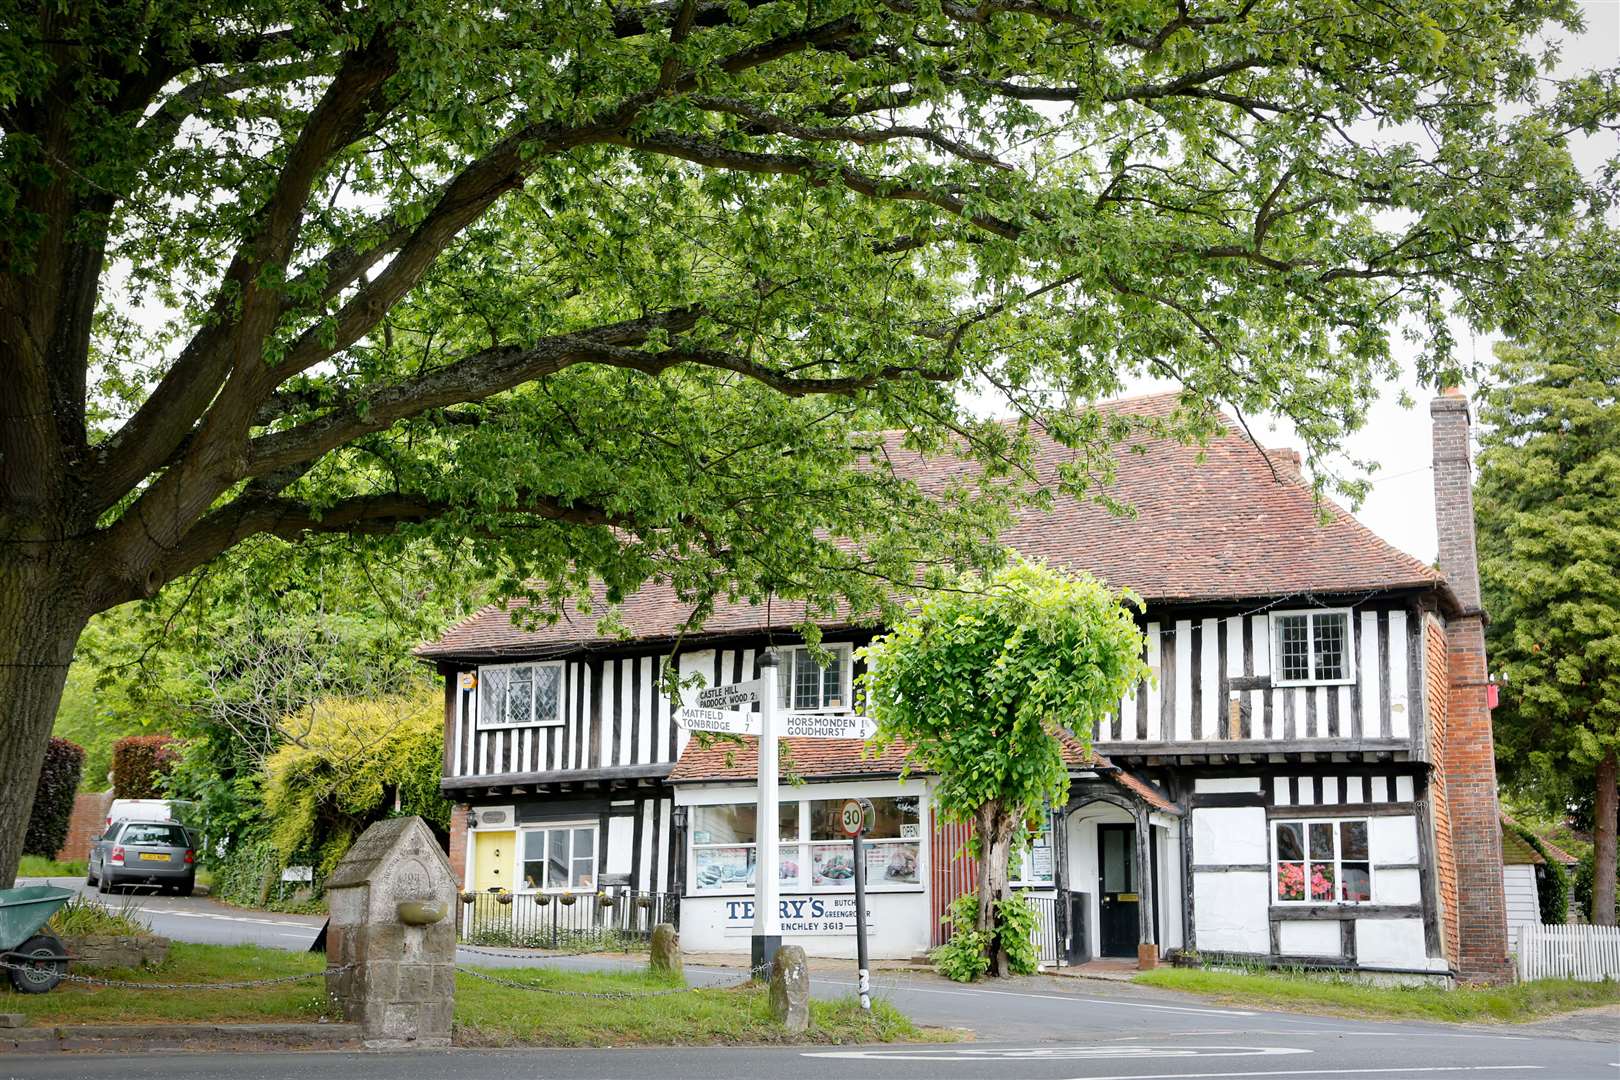 Sophie grew up in the pretty village of Brenchley, near Tunbridge Wells